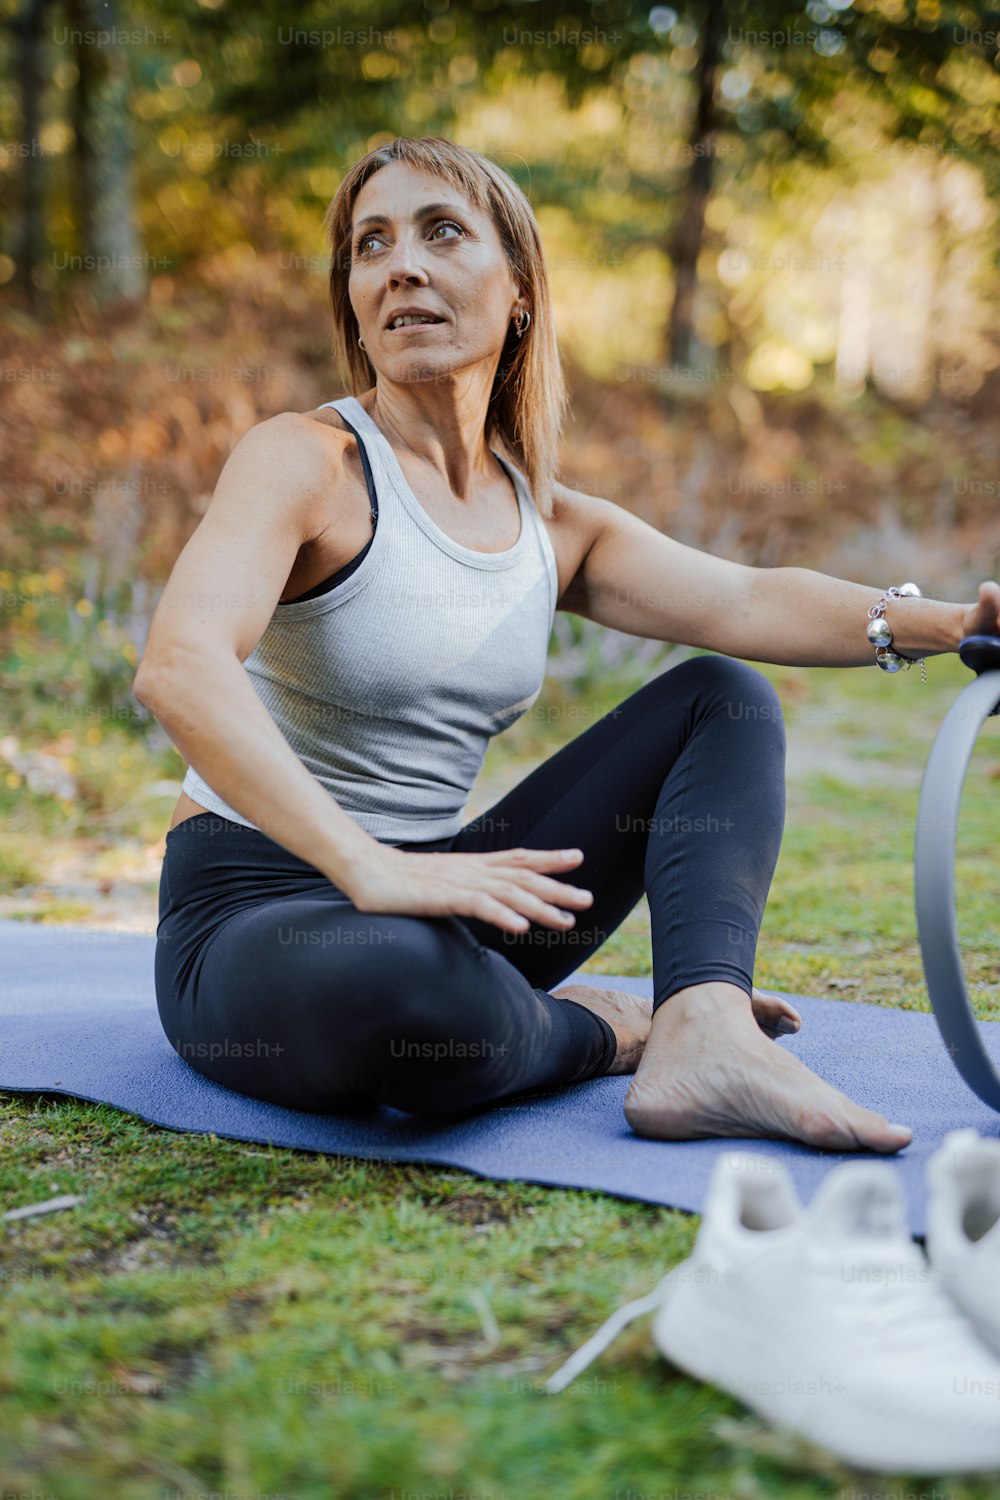 a woman sitting on a yoga mat with her hands on her hips